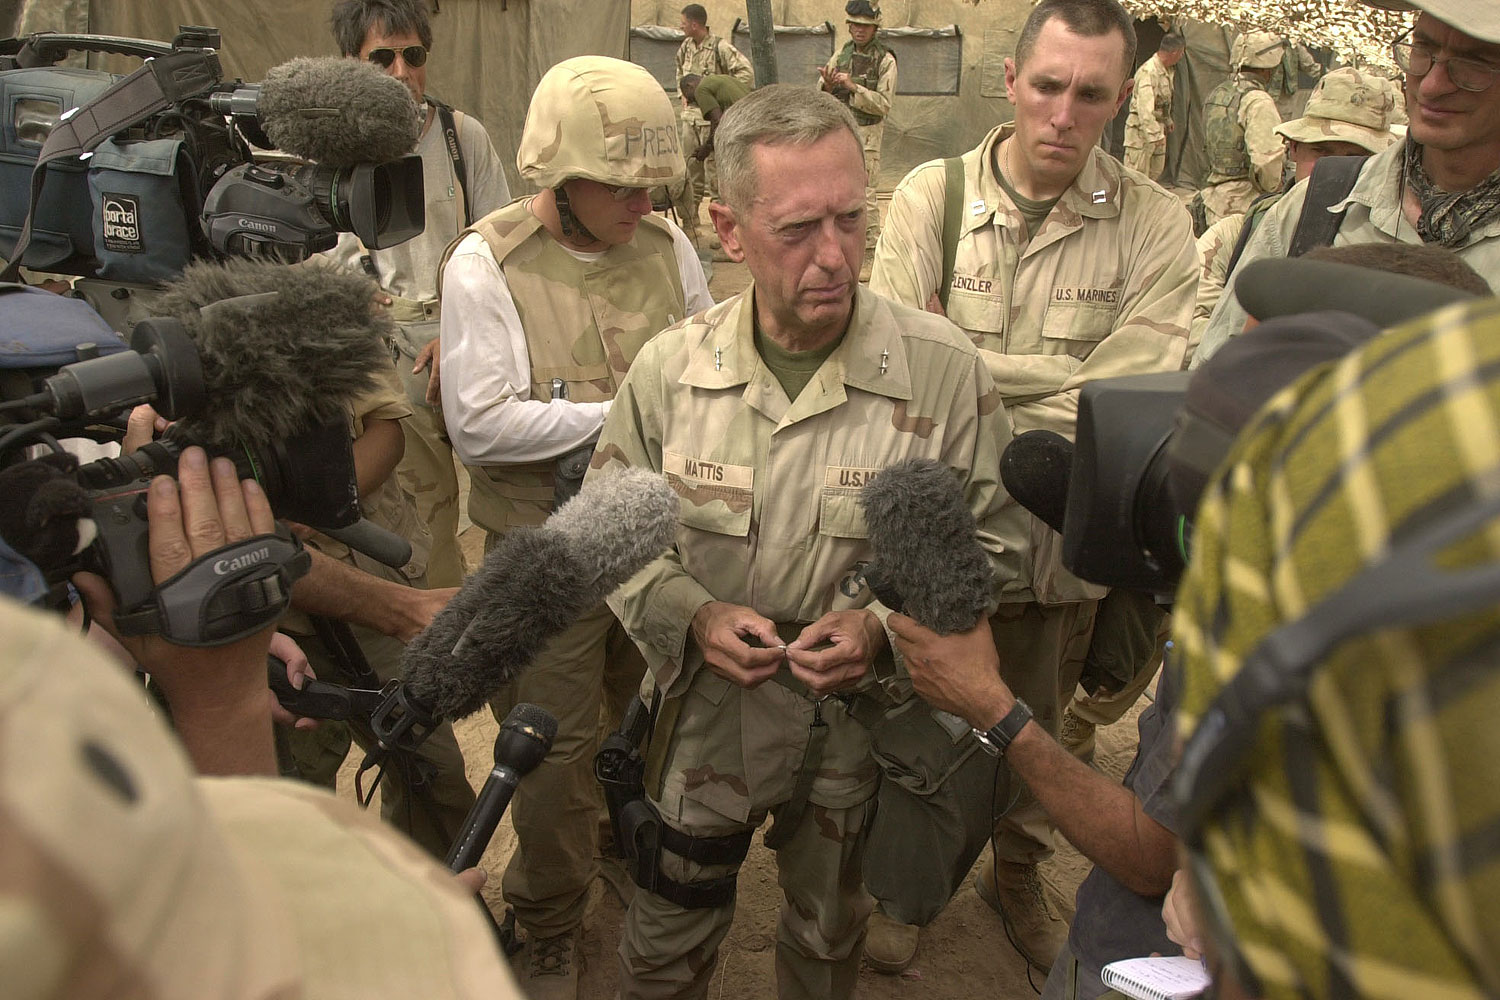 General Jim Mattis answers questions in Iraq in 2003. He has served in both Gulf Wars as well as in Afghanistan (Julie Jacobson / AP)